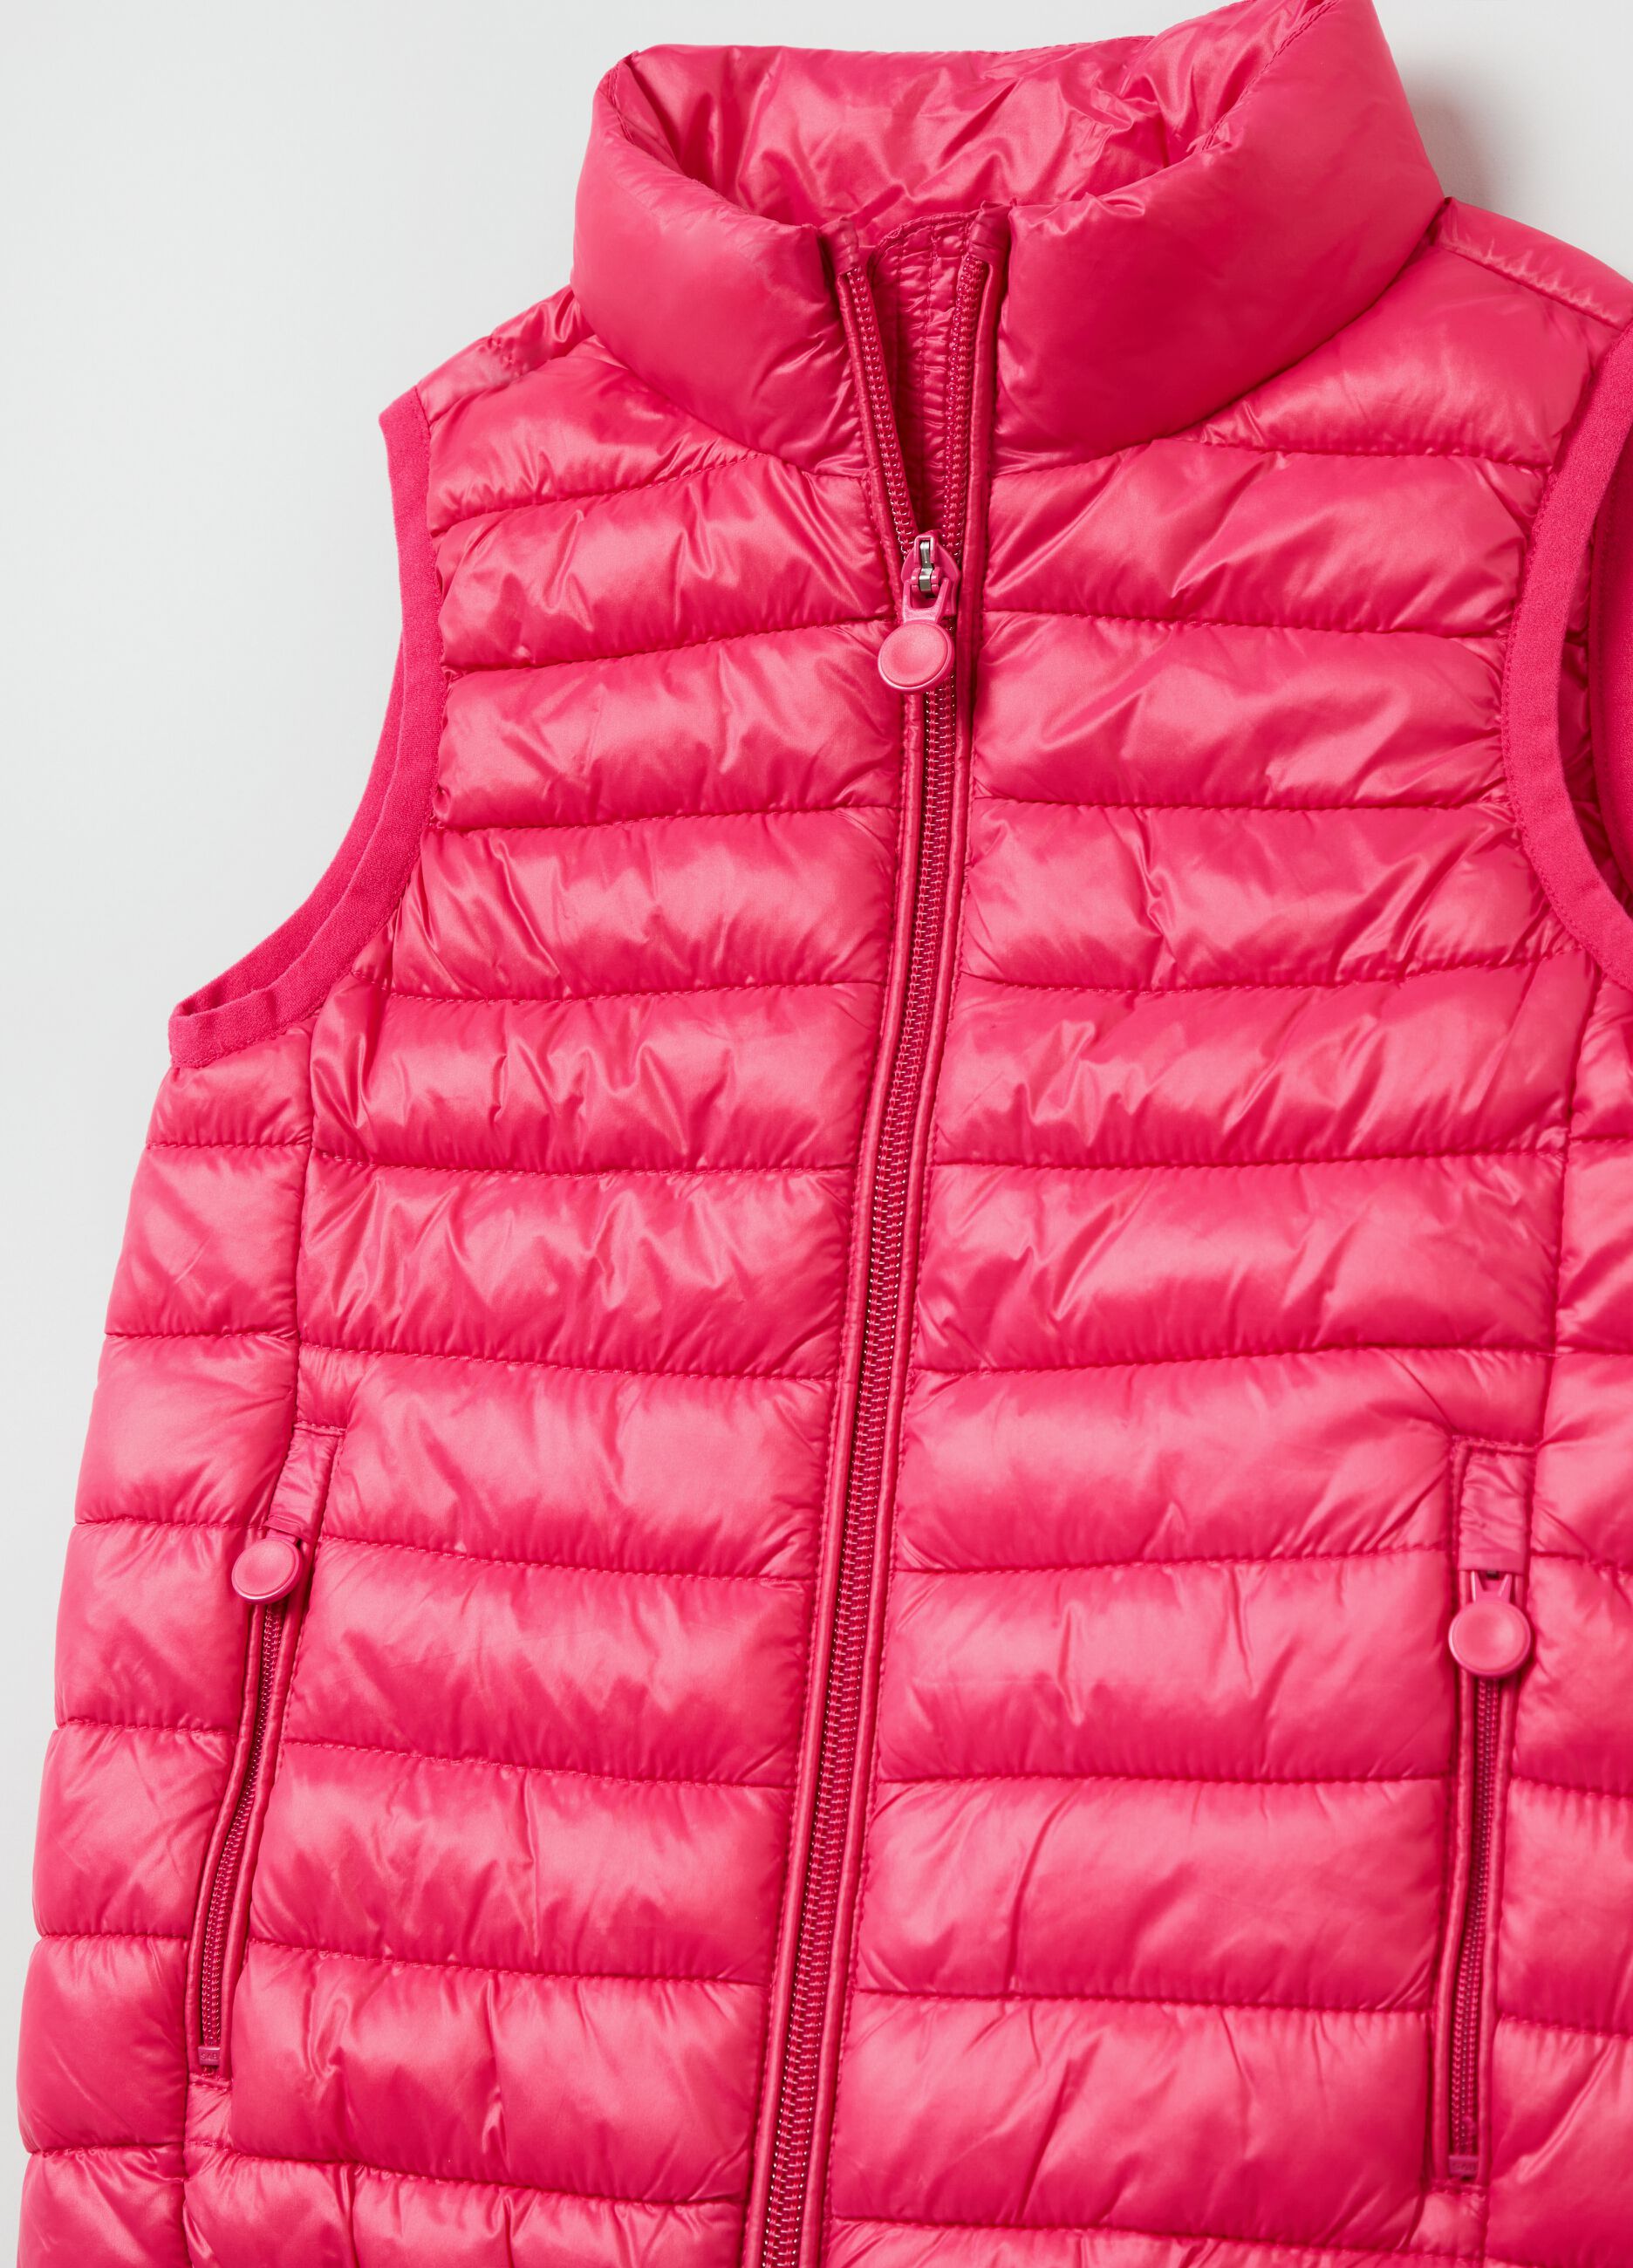 Ultralight quilted gilet